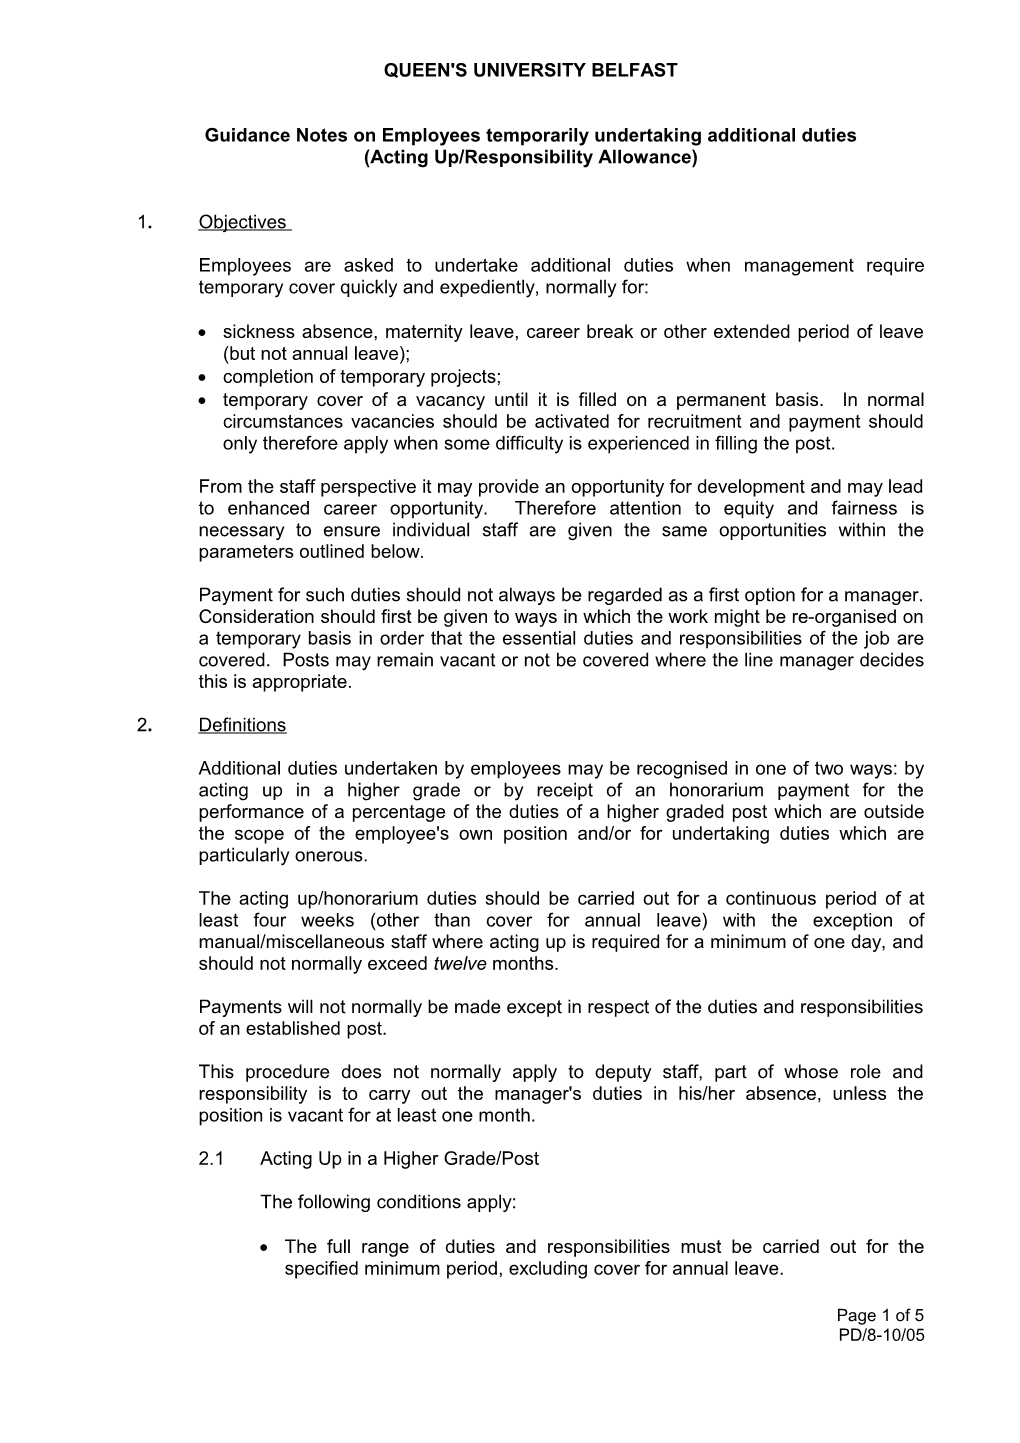 Guidance Notes on Employees Temporarily Undertaking Additional Duties